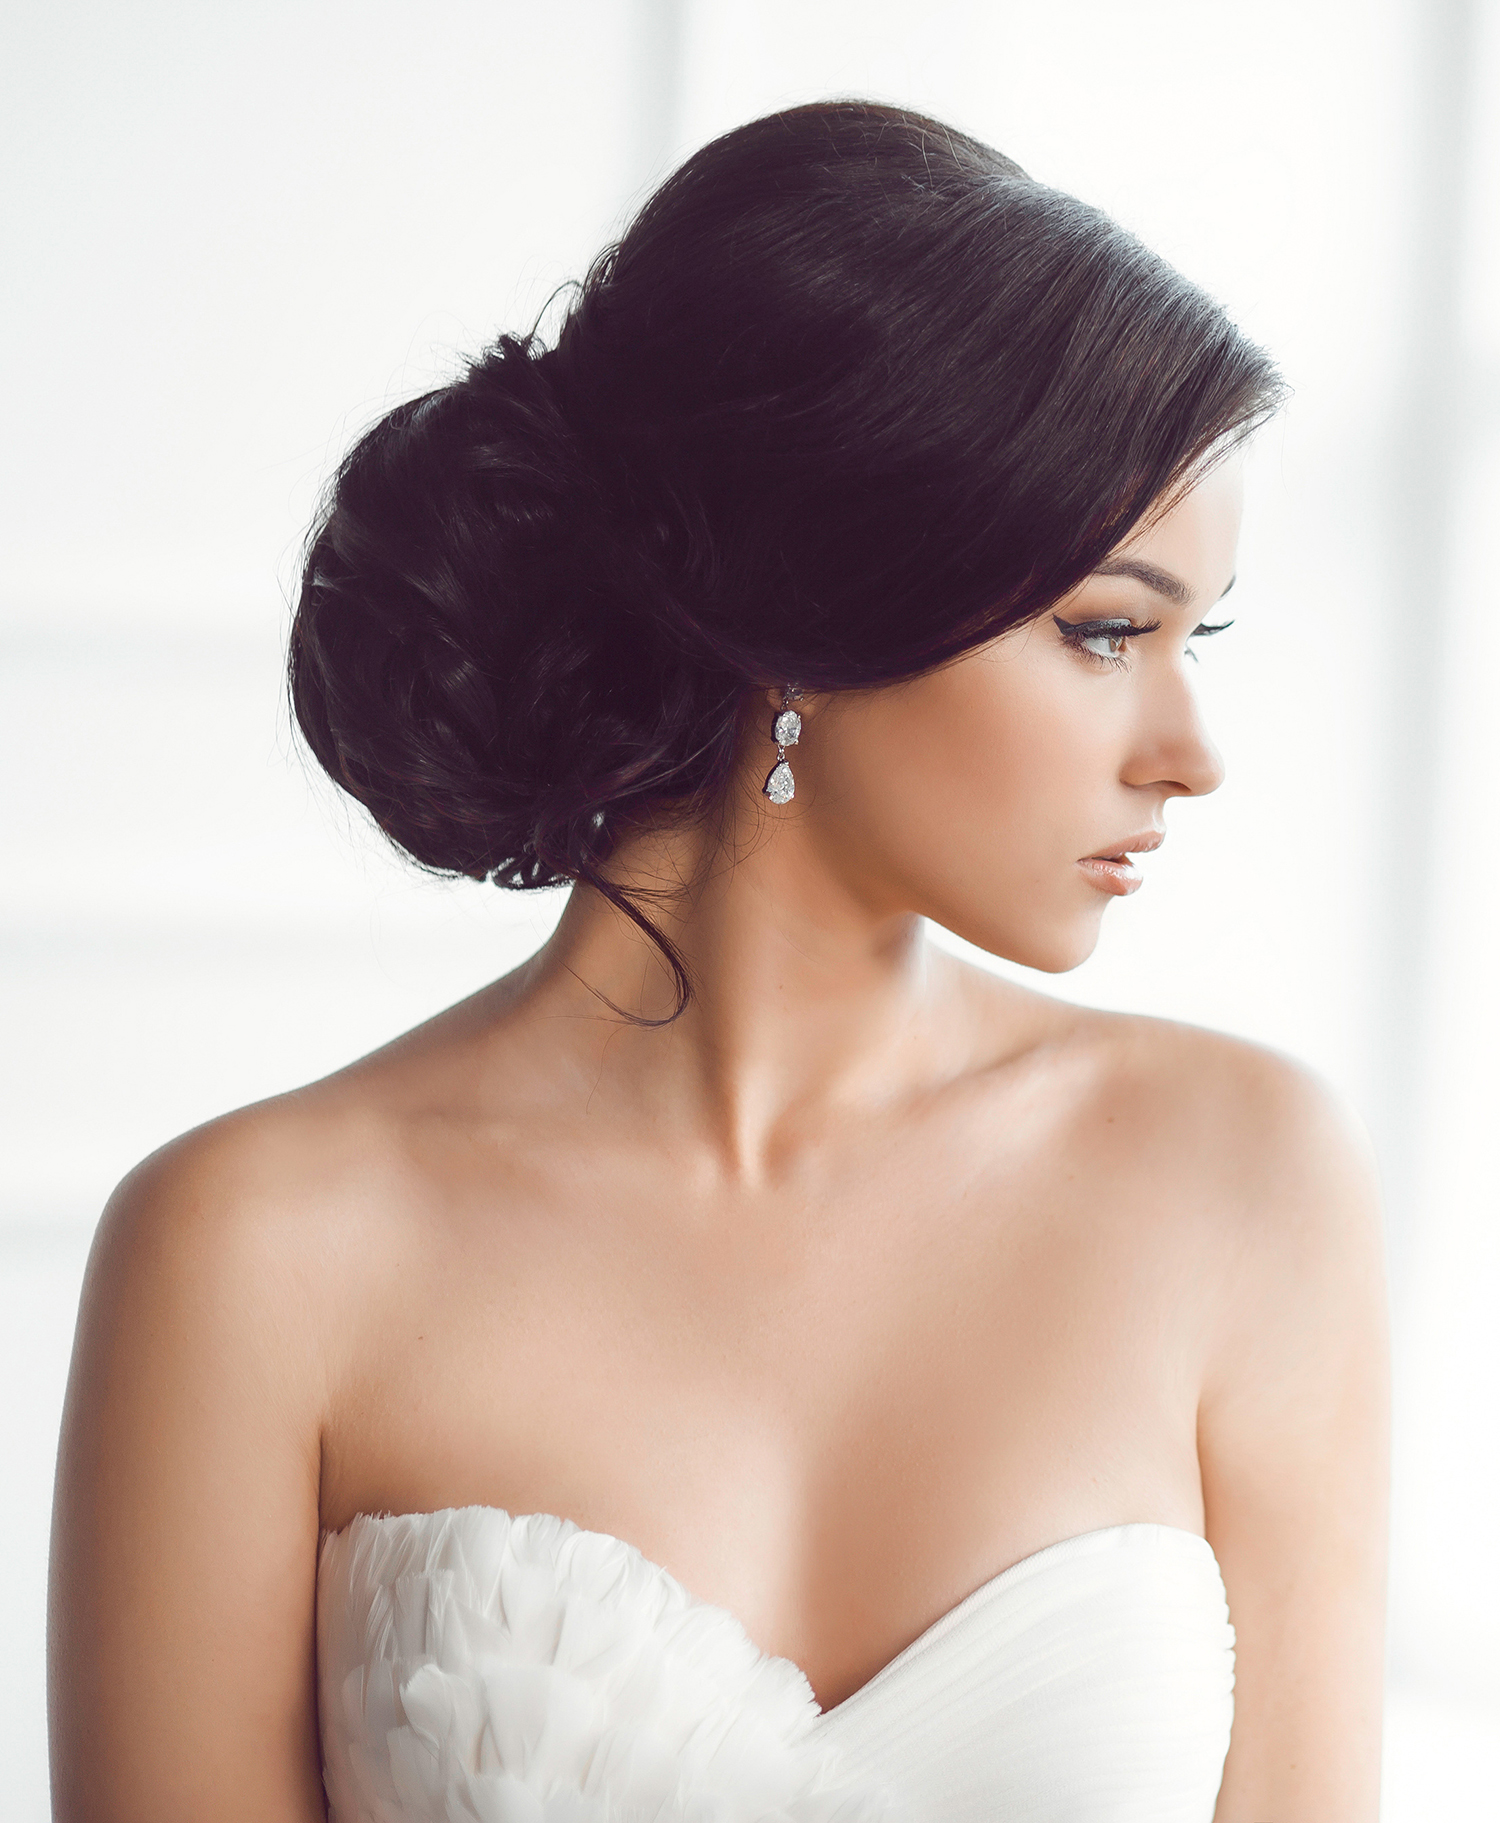 The Best Wedding Hairstyles for a One-Shoulder Dress